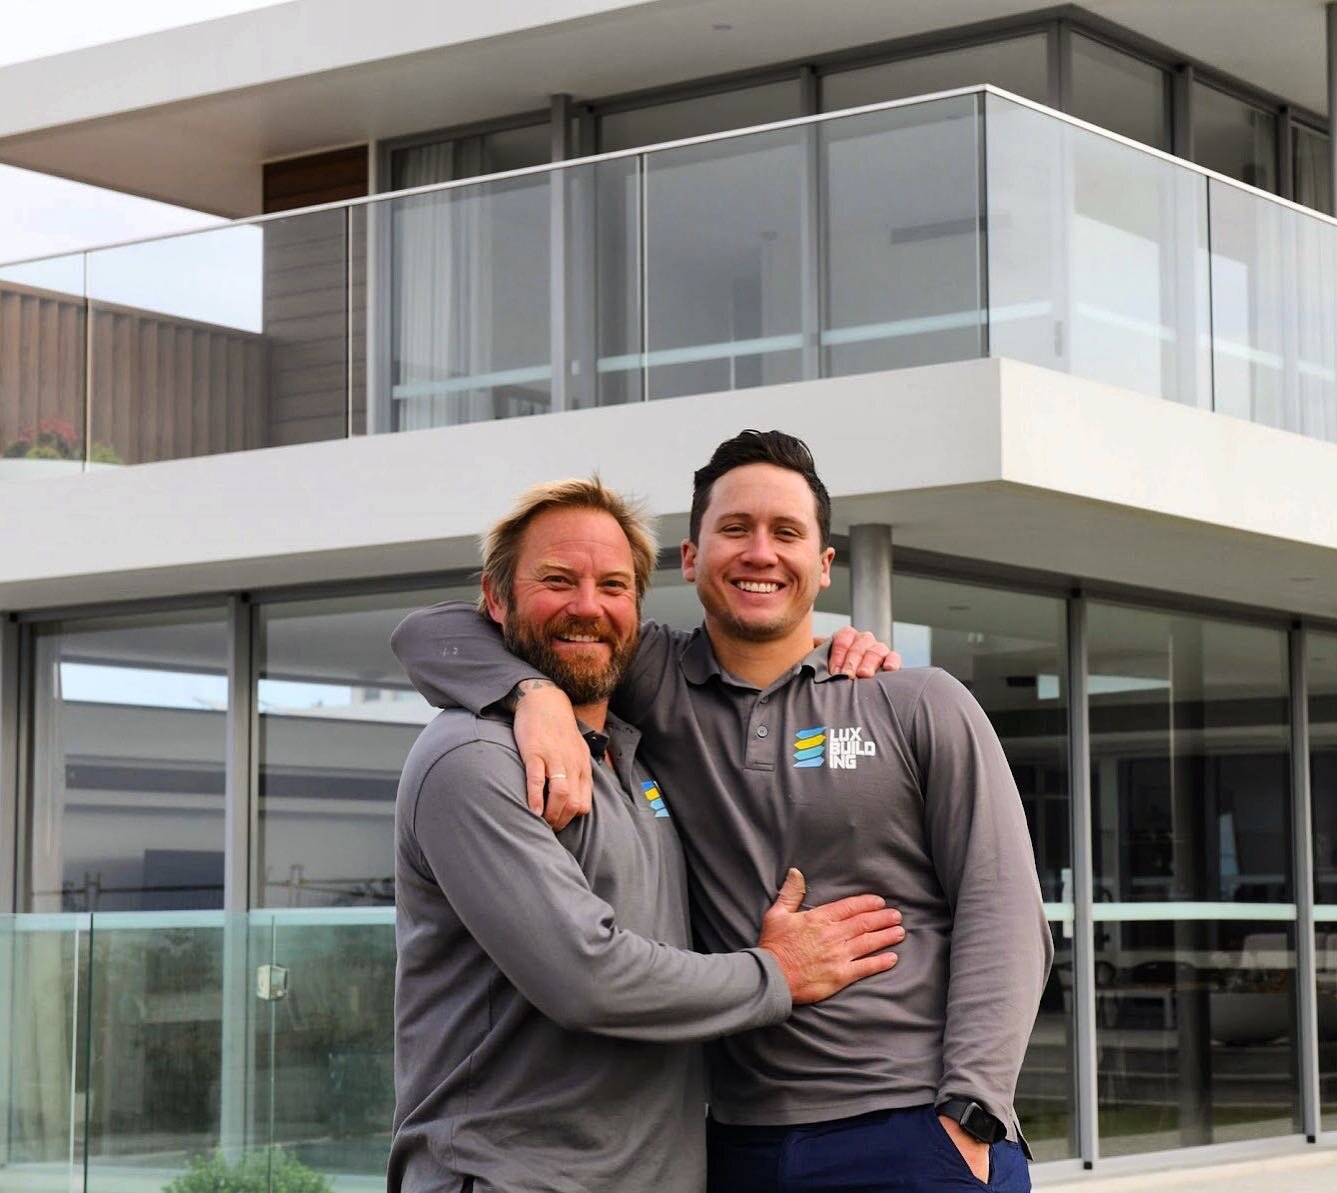 Team work makes the dream work ✨👊🏼
⠀⠀⠀⠀⠀⠀⠀⠀ ⠀⠀⠀⠀⠀⠀
Meet Mick and Dan aka the brains and brawn behind Lux Building (in no specific order, ahem!). These two aren&rsquo;t just great mates, but together they run every facet of Lux. It helps building so